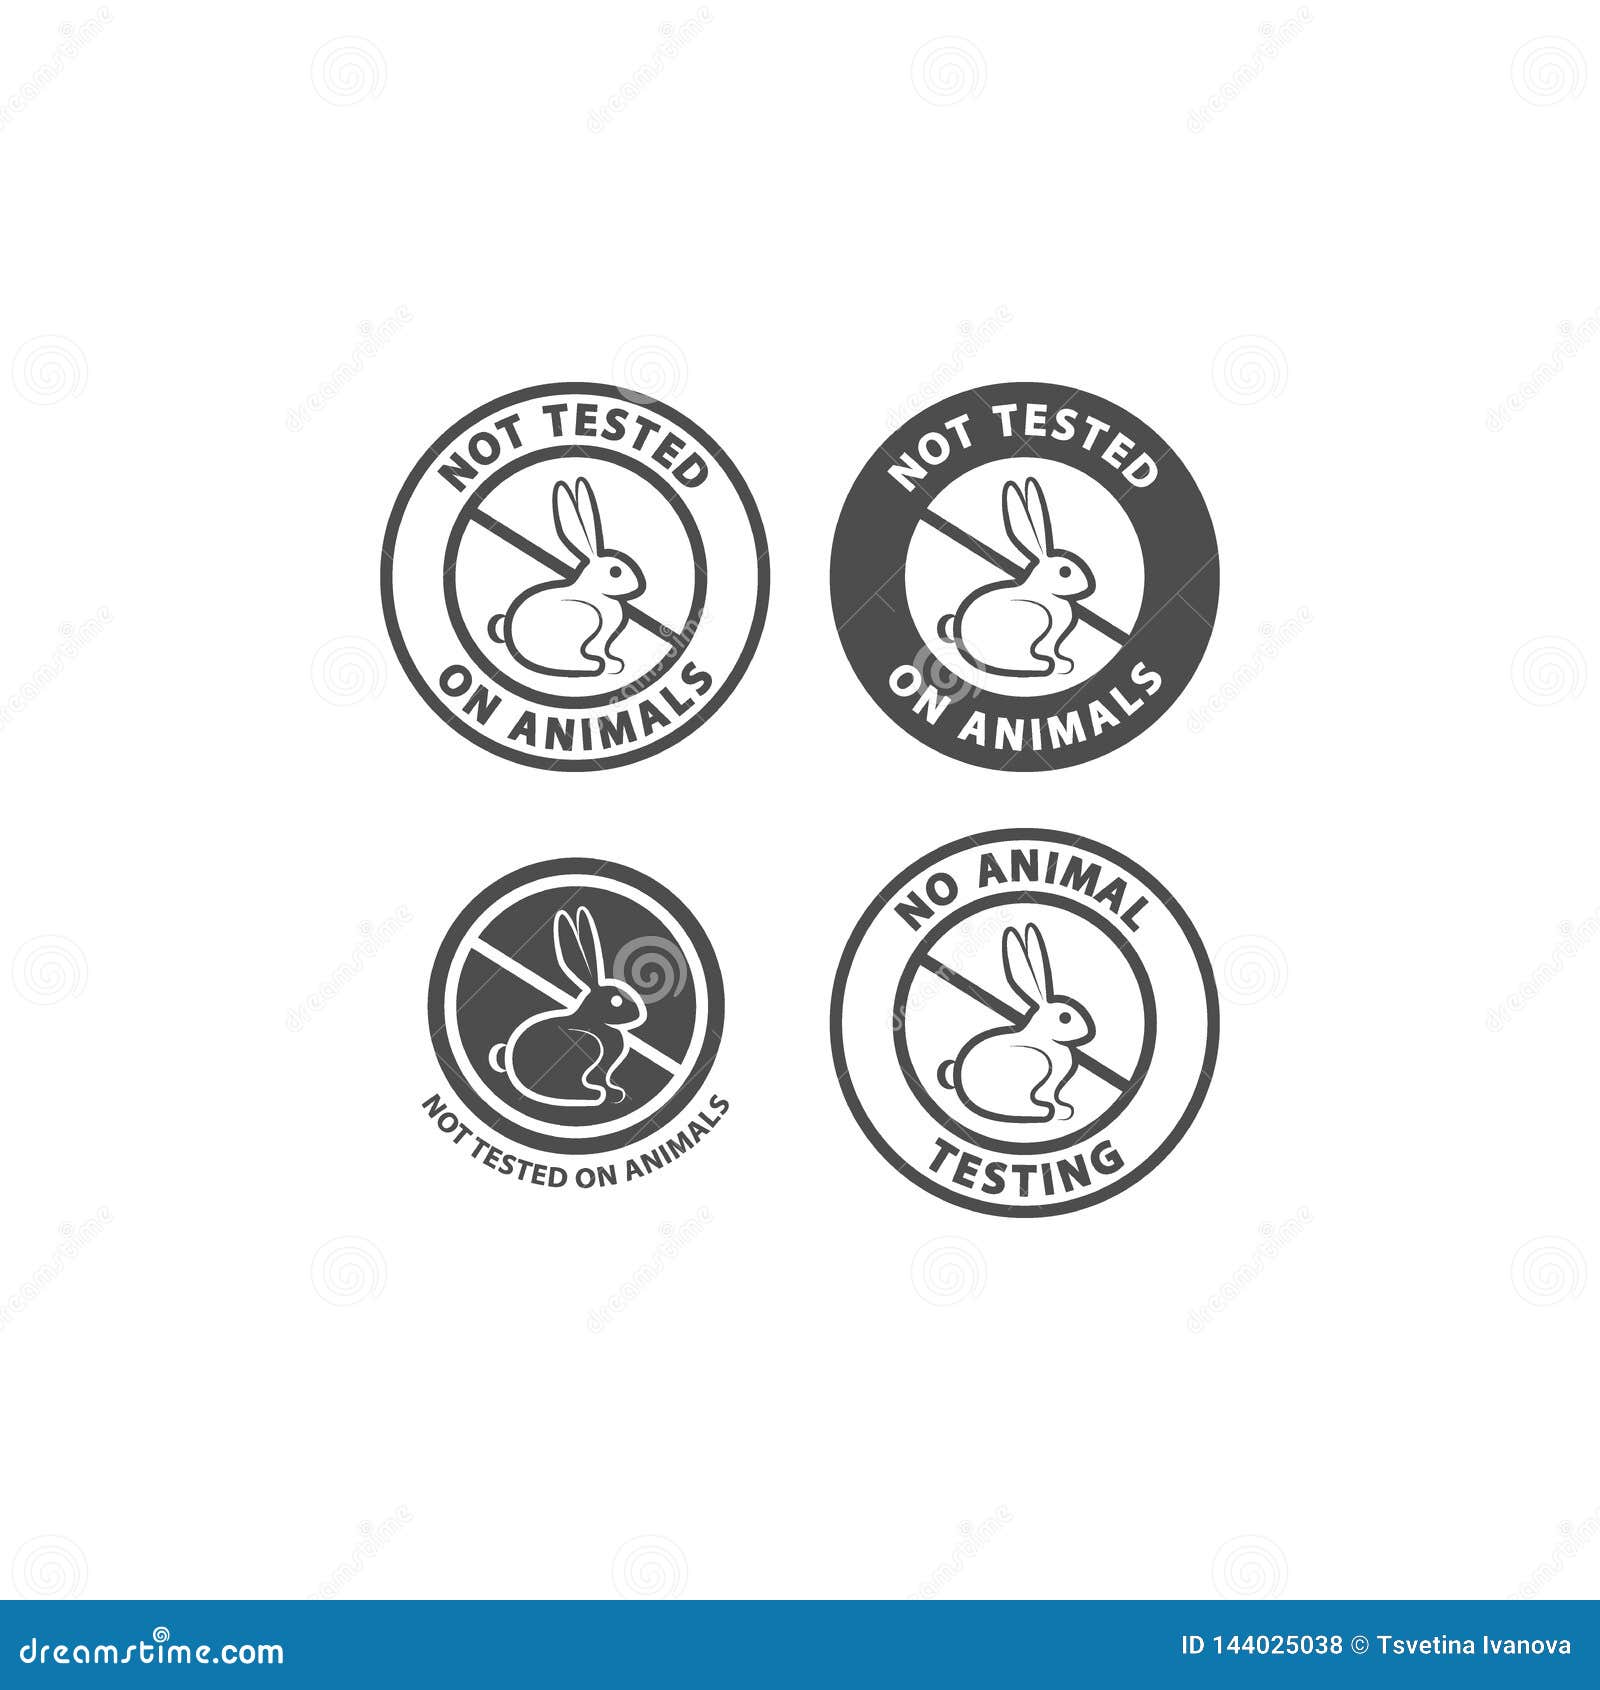 Download Not Tested On Animals And No Animal Testing Vector Sign. Stock Vector - Illustration of symbol ...